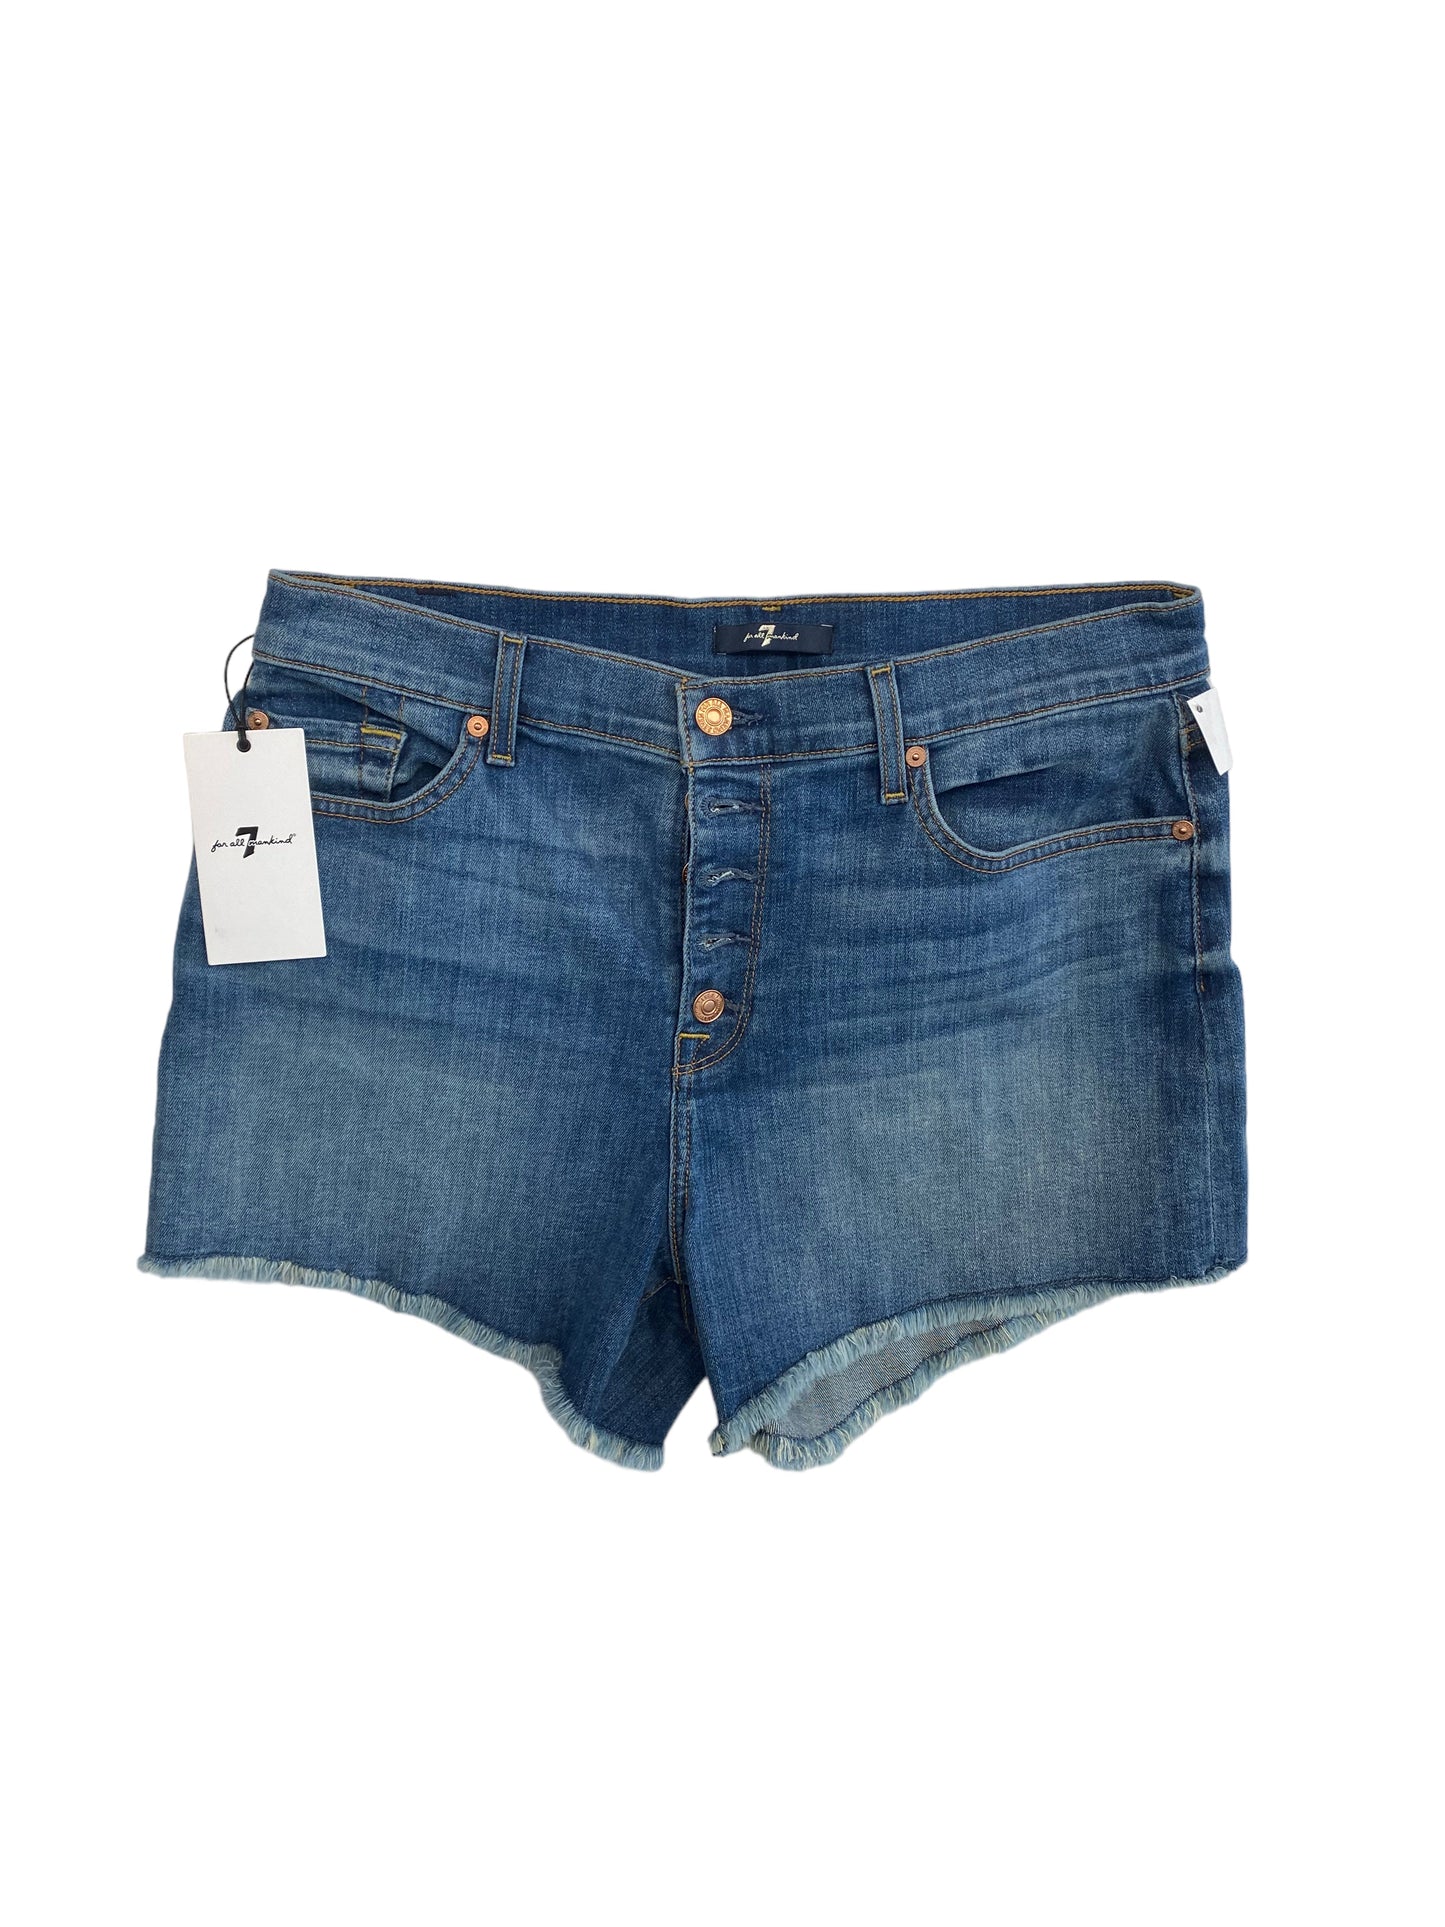 Blue Denim Shorts 7 For All Mankind, Size 12